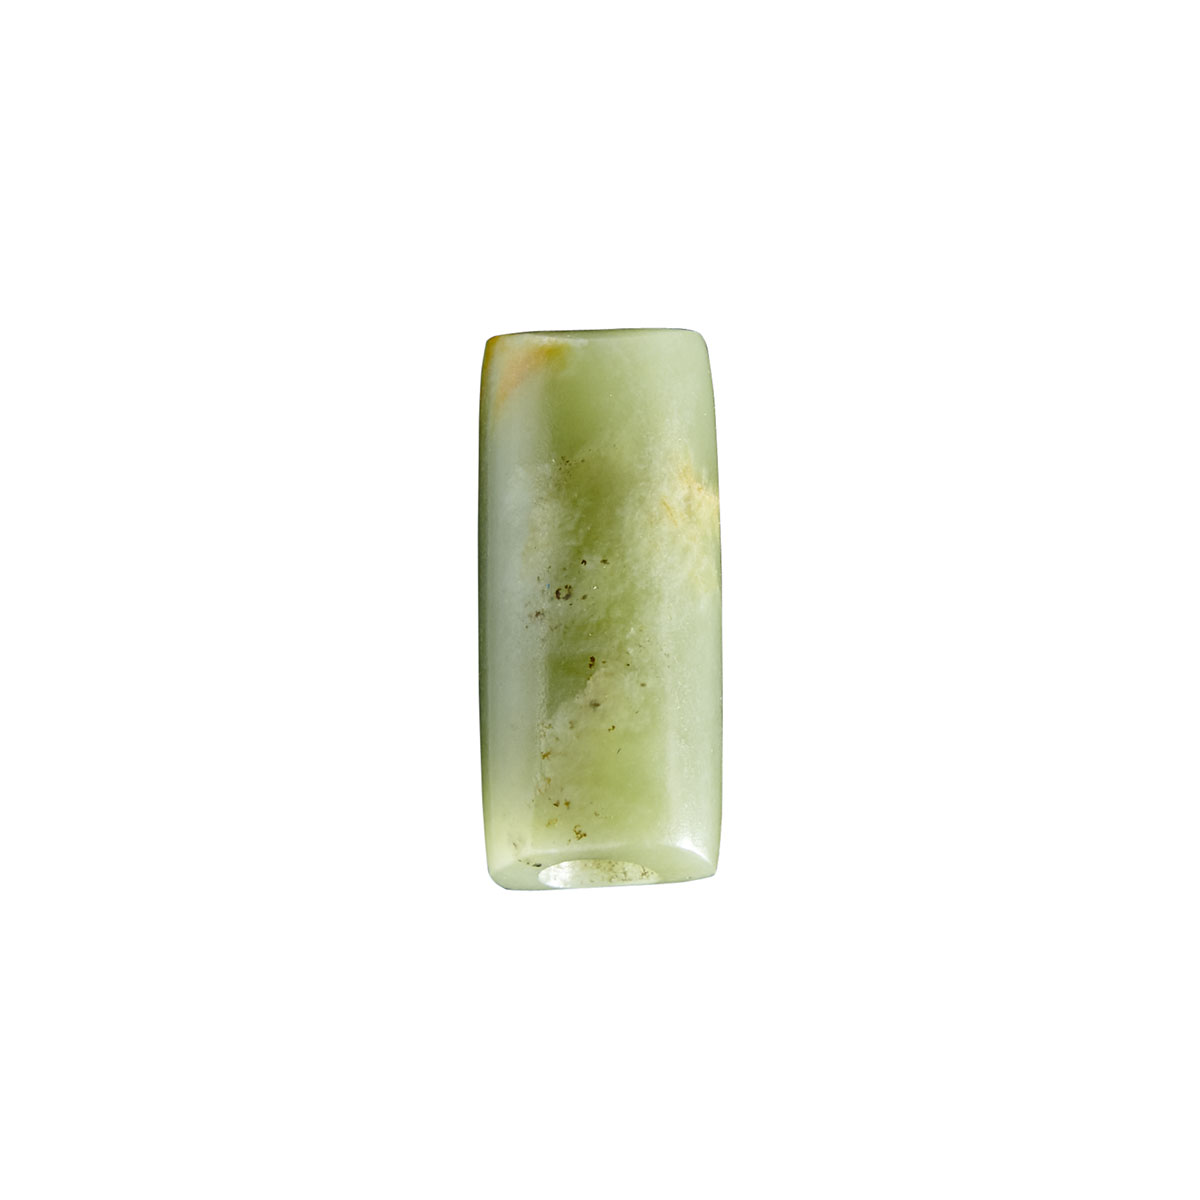 A Large Jade Bead, Hongshan Culture, Neolithic Period or Later